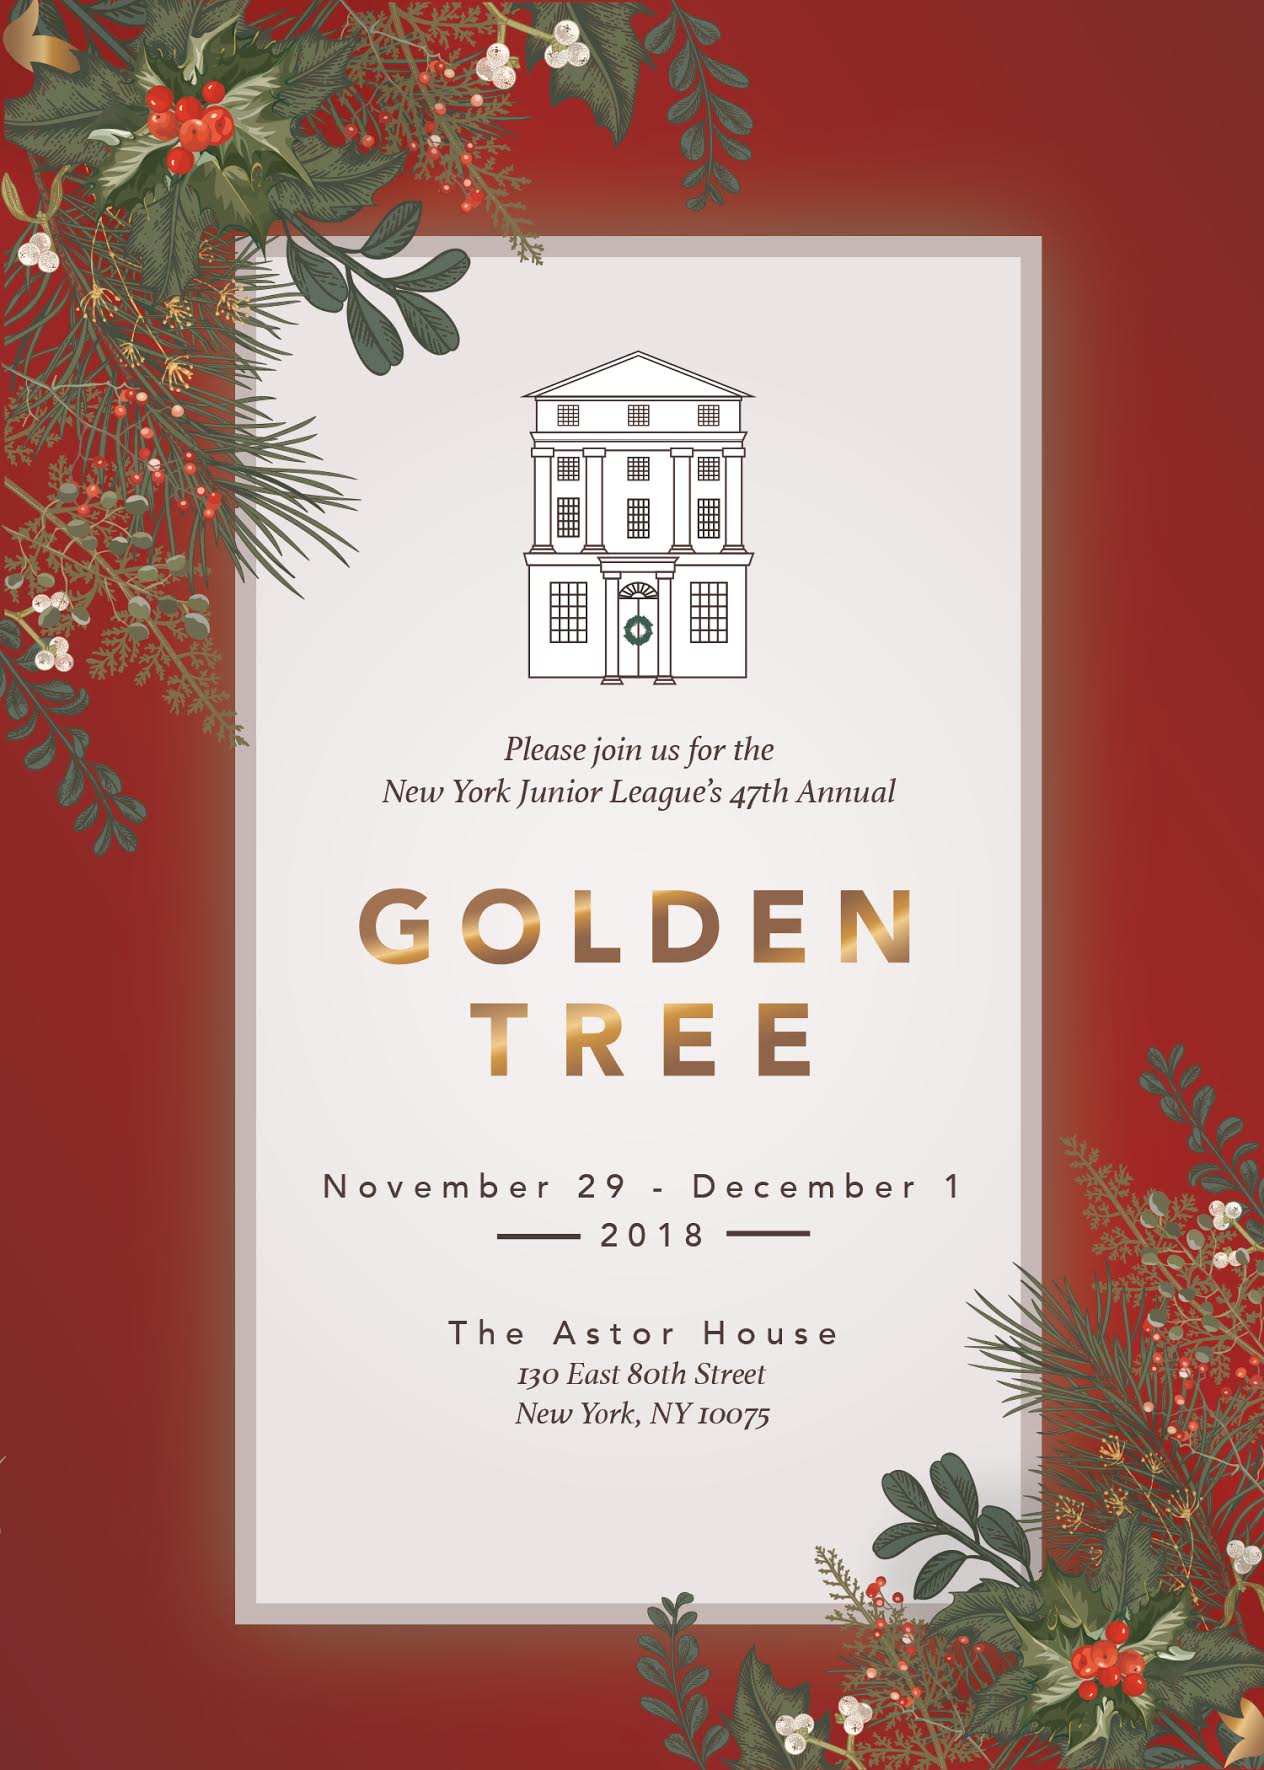 We're Popping Up At Golden Tree!